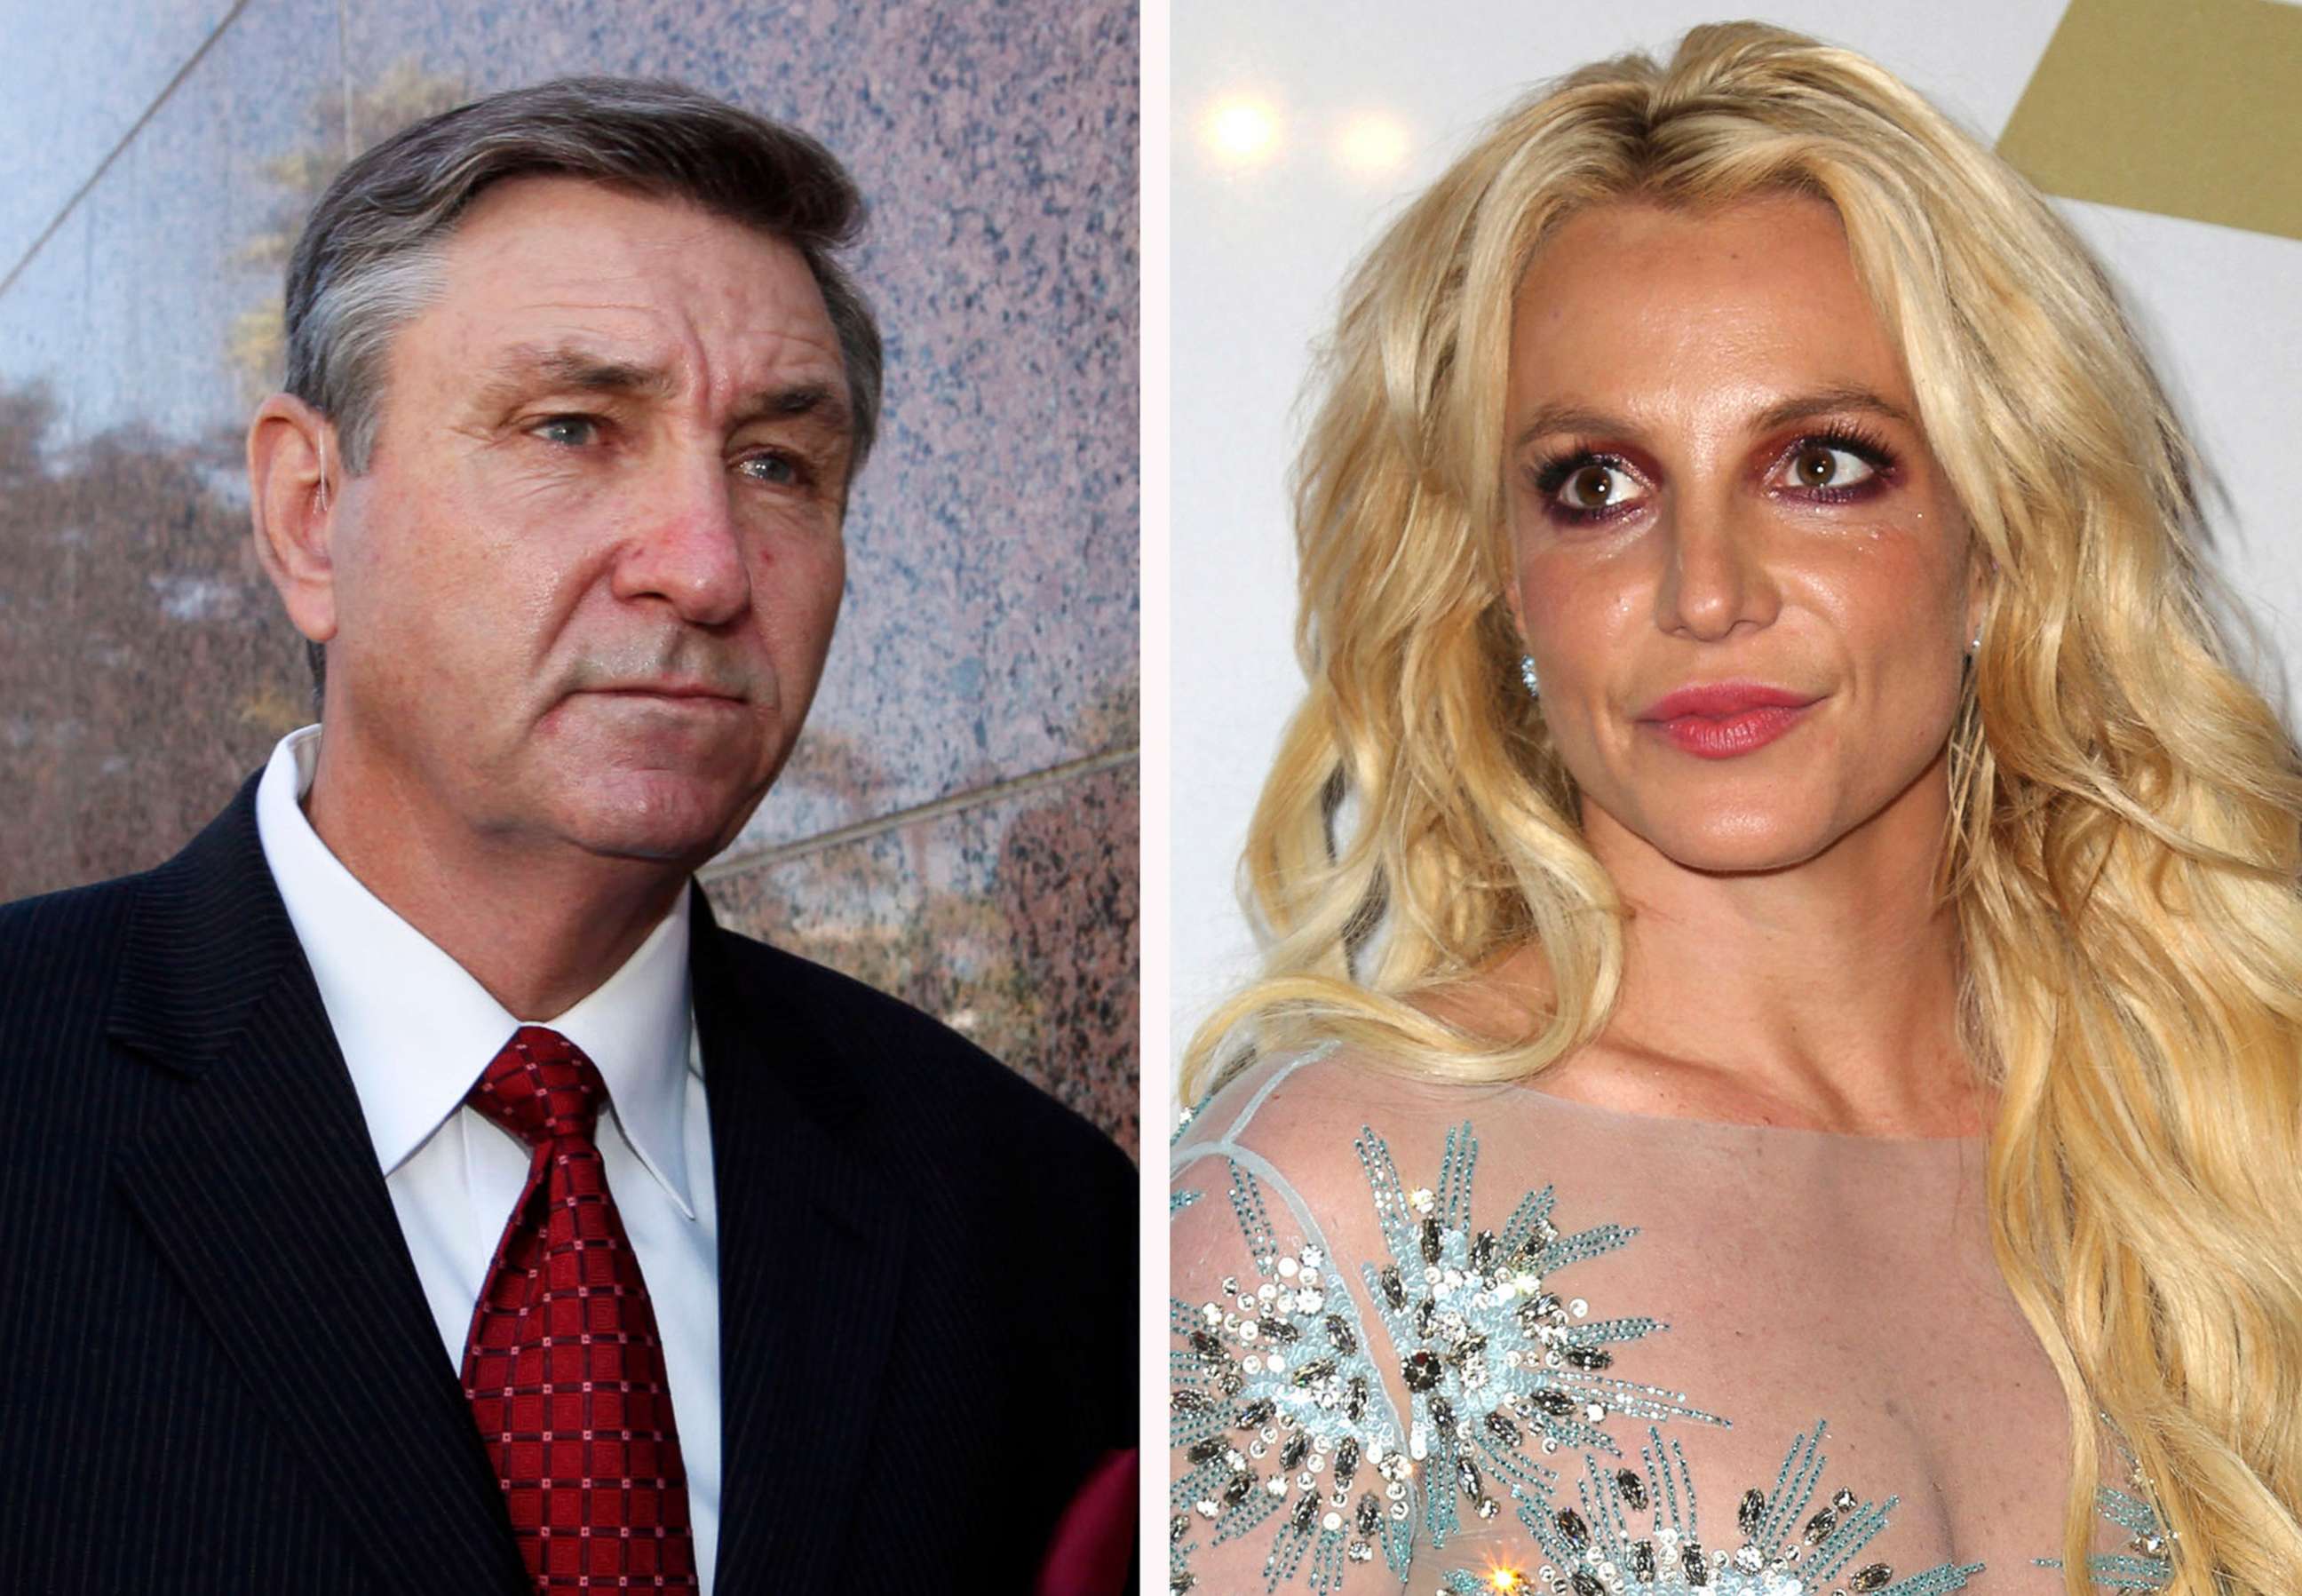 PHOTO: FILE - This combination photo shows Jamie Spears, left, father of Britney Spears, as he leaves the Stanley Mosk Courthouse on Oct. 24, 2012, in Los Angeles and Britney Spears at the Clive Davis and The Recording Academy Pre-Grammy Gala.